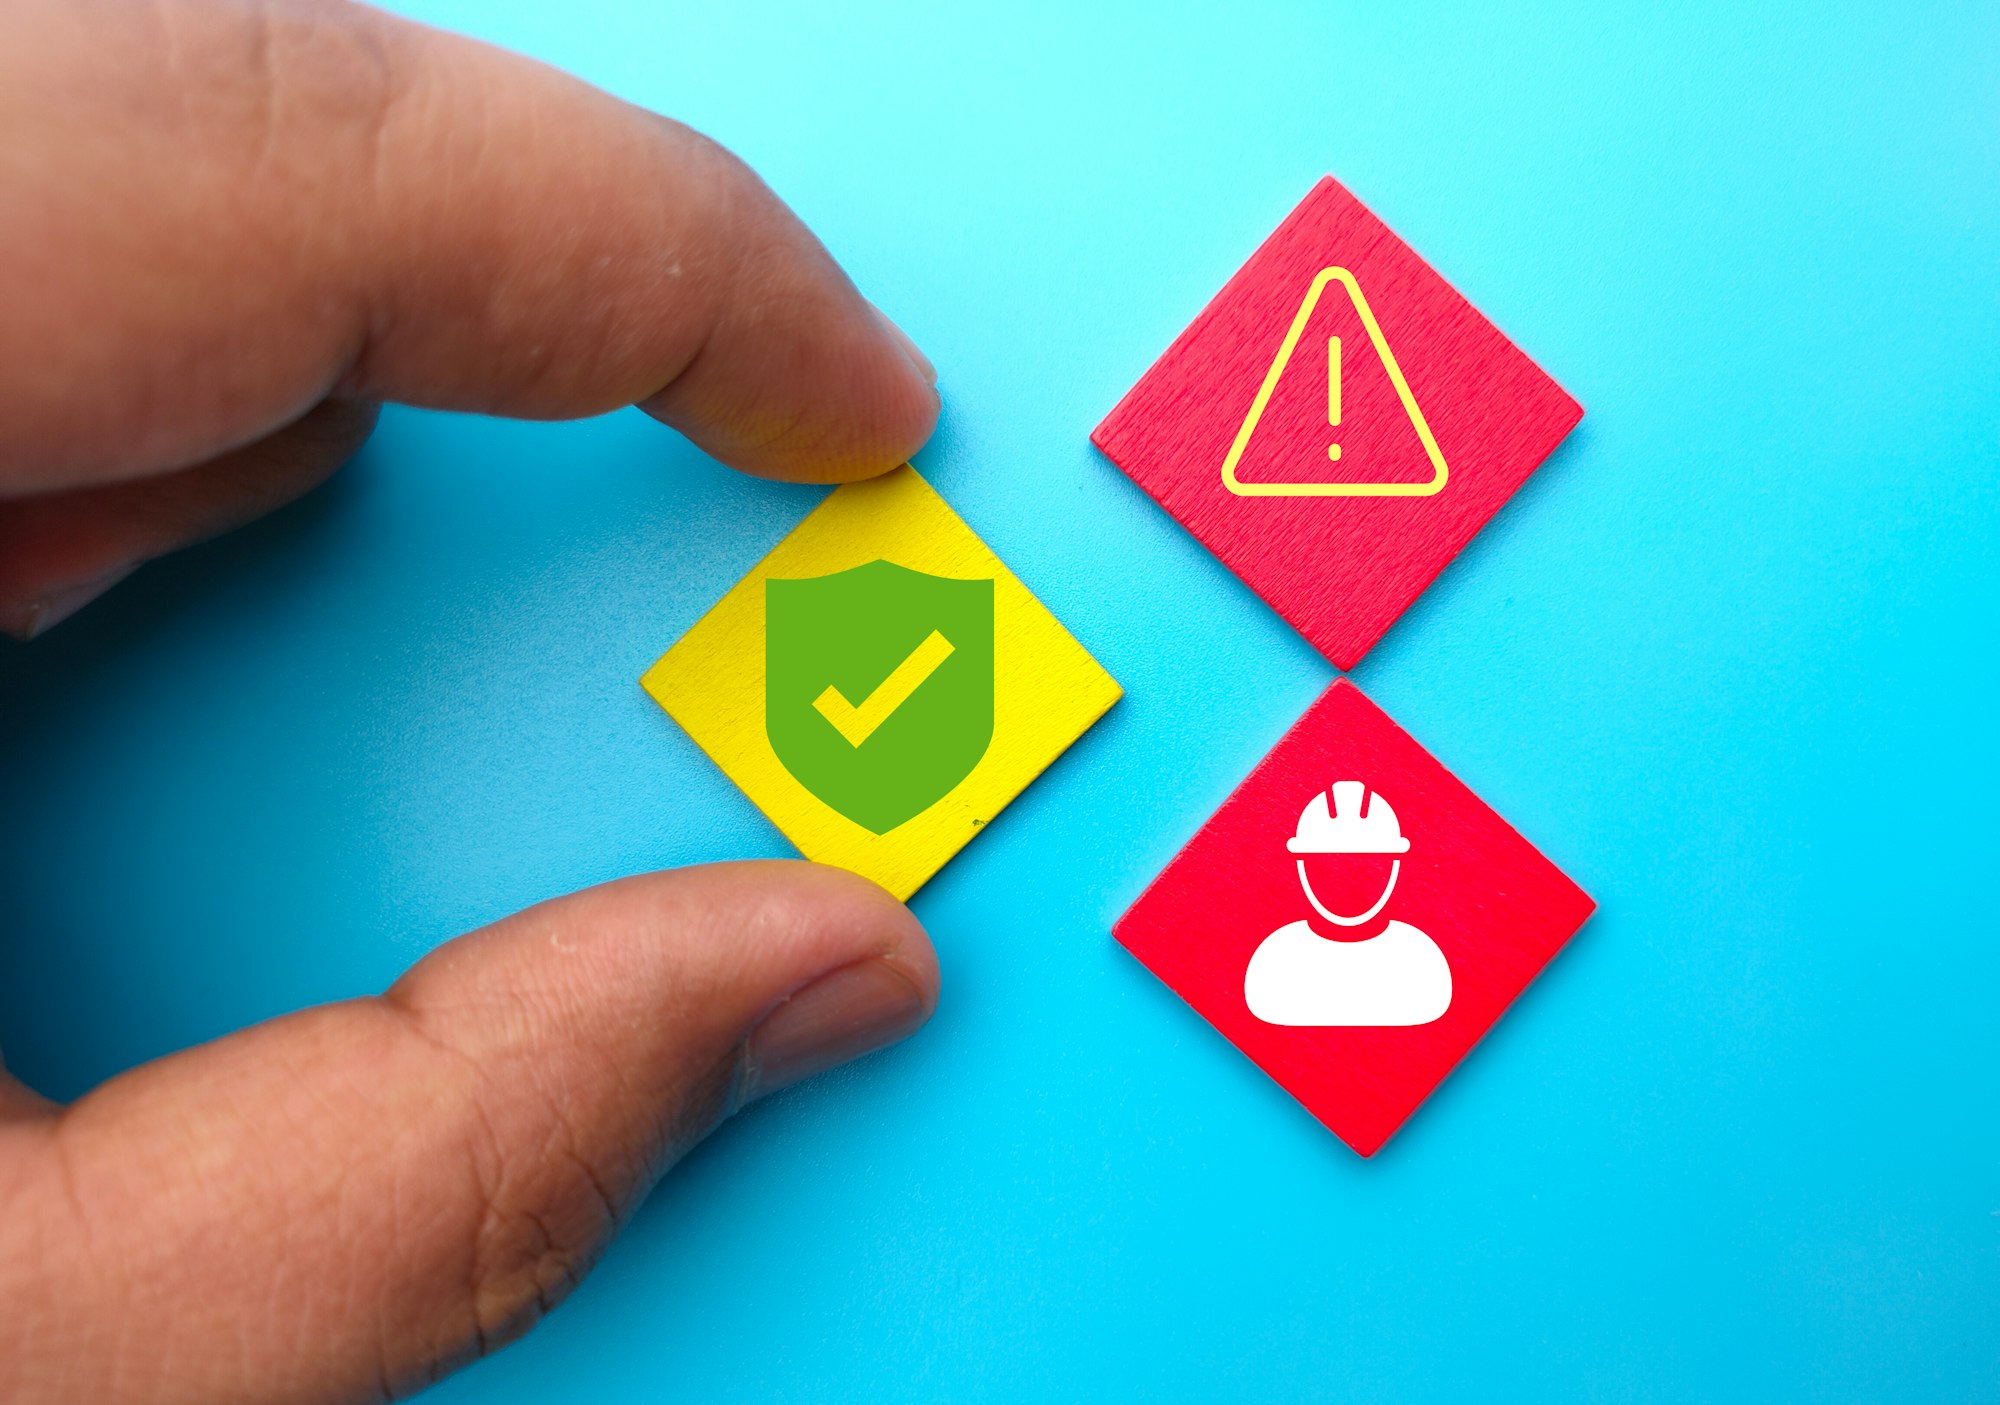 Close-up shot of a hand holding colorful wooden rhombuses with a worker, caution, and safety icons